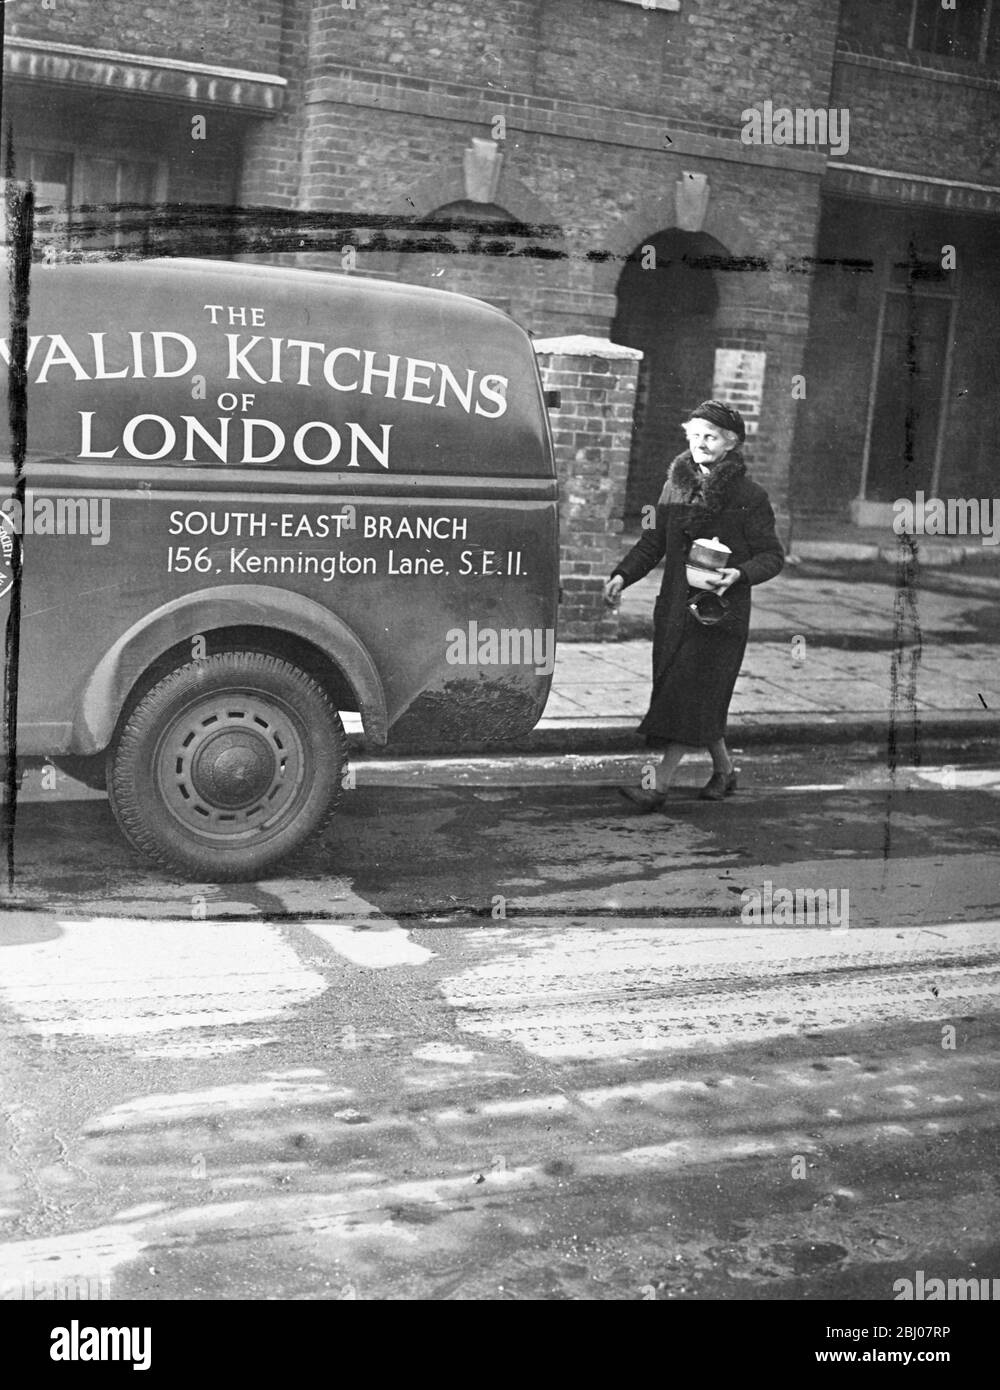 Feeding the infirm during the ice blitz. - The invalid kitchens of London, have been kept busy during the recent 'freezer', delivering dinners to infirm people. Run by voluntary contributions, the kitchens deliver an average of 60 dinners daily to London's invalids unable to leave their homes. - Photo shows, Mrs Ewins at work in London, delivering cans of food to a home of an invalid. - 26 February 1947 Stock Photo